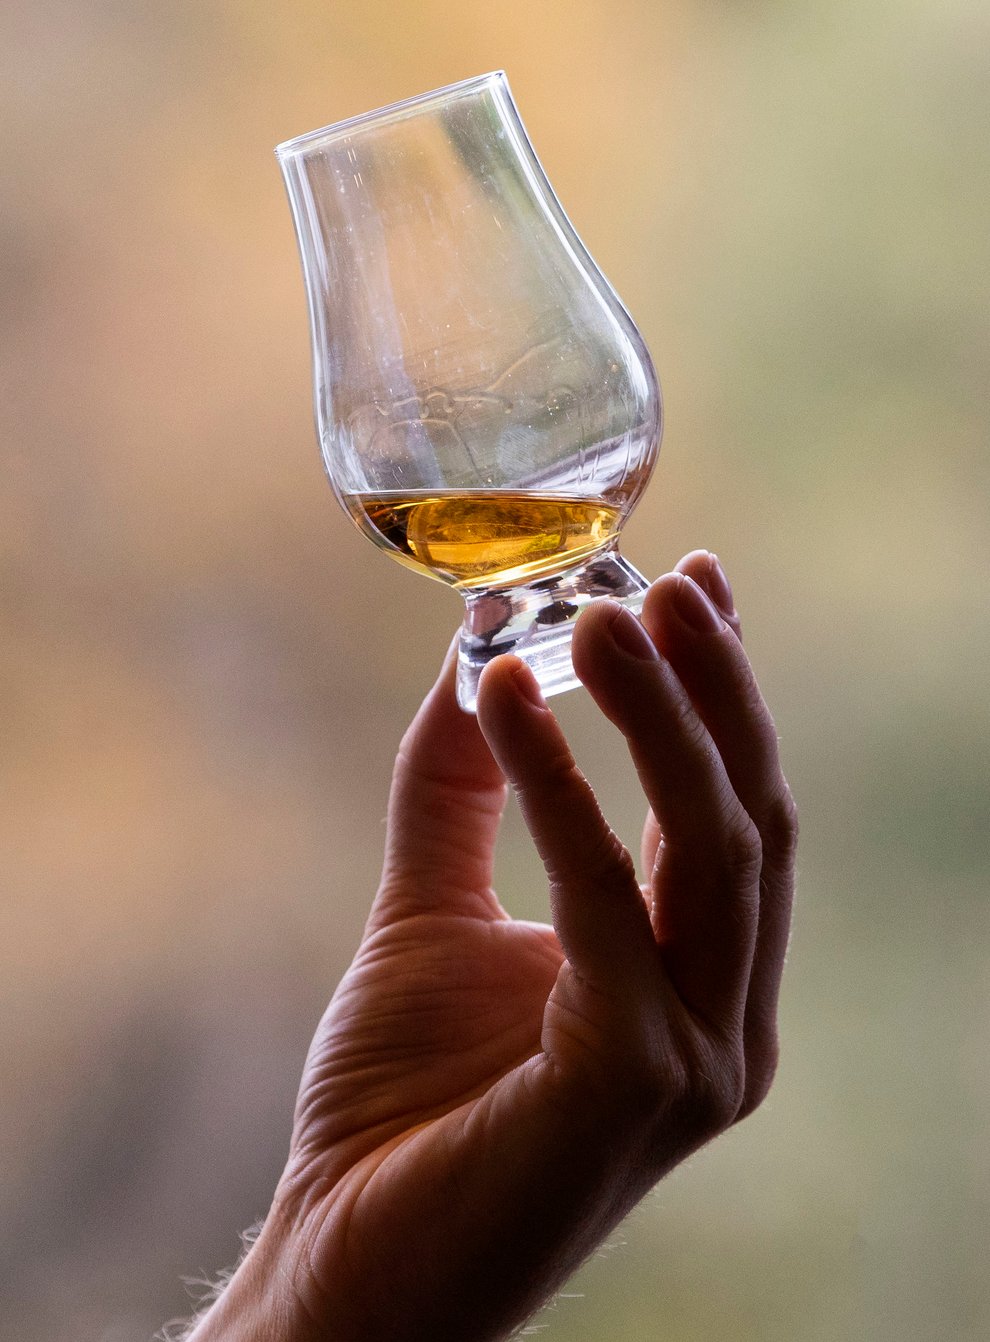 The ‘forgotten’ cask of whisky has sold for what is believed to be a world record sum (Jane Barlow/PA)